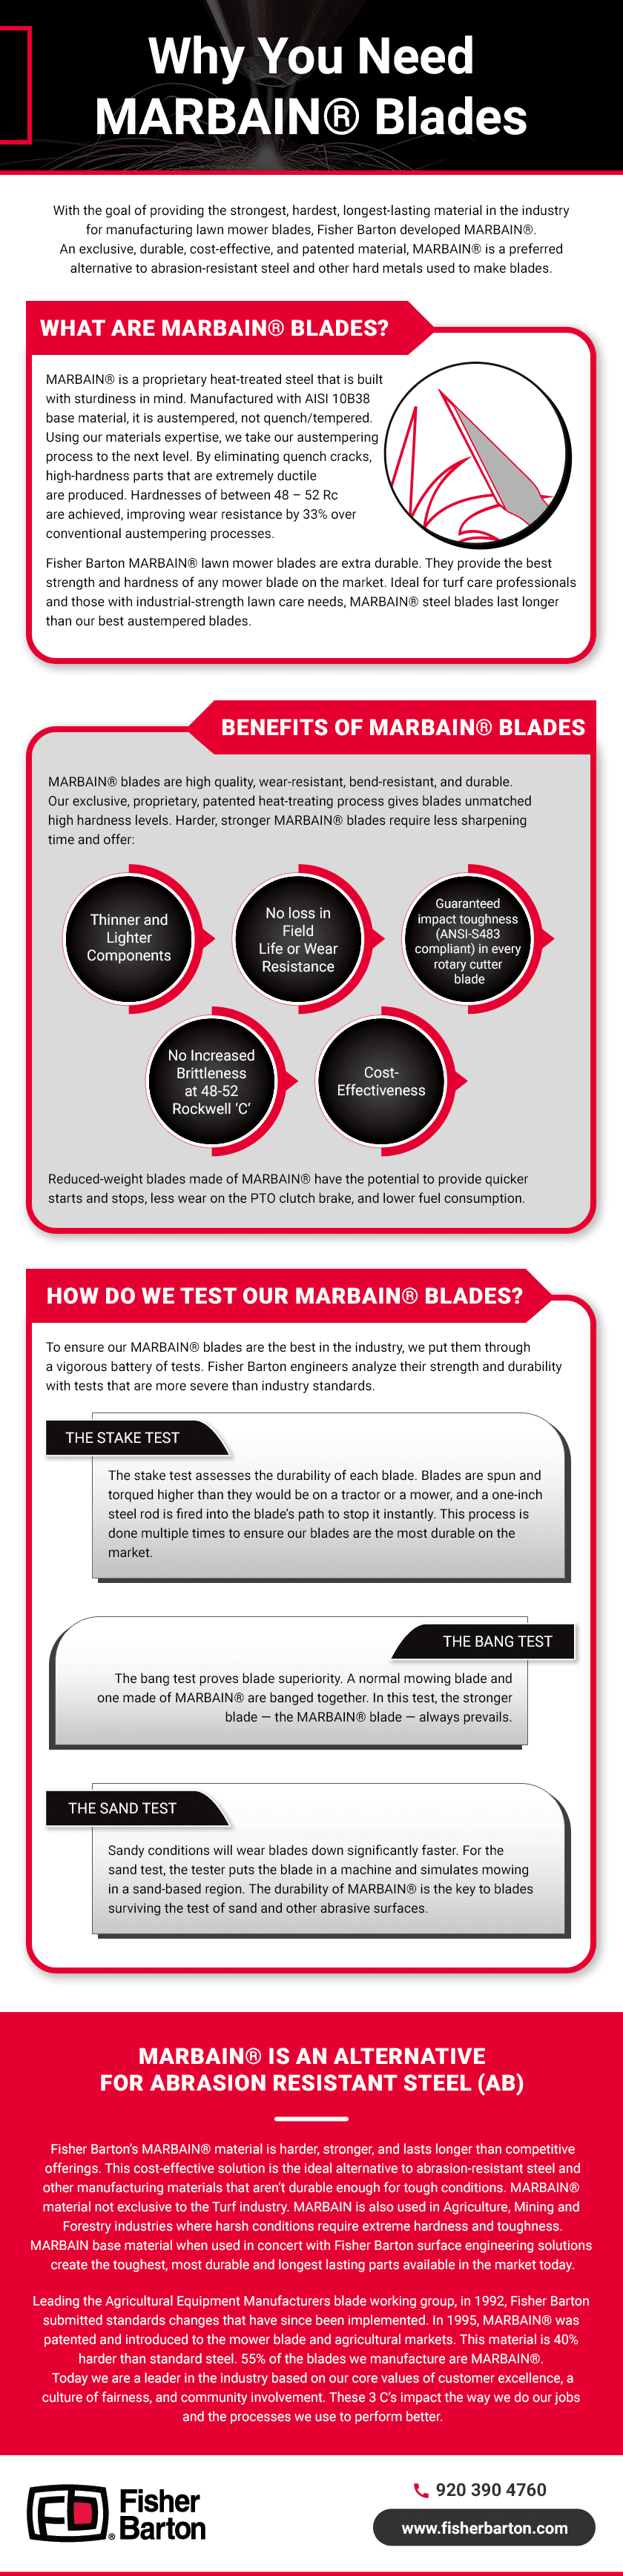 Why You Need Marbain® Blades